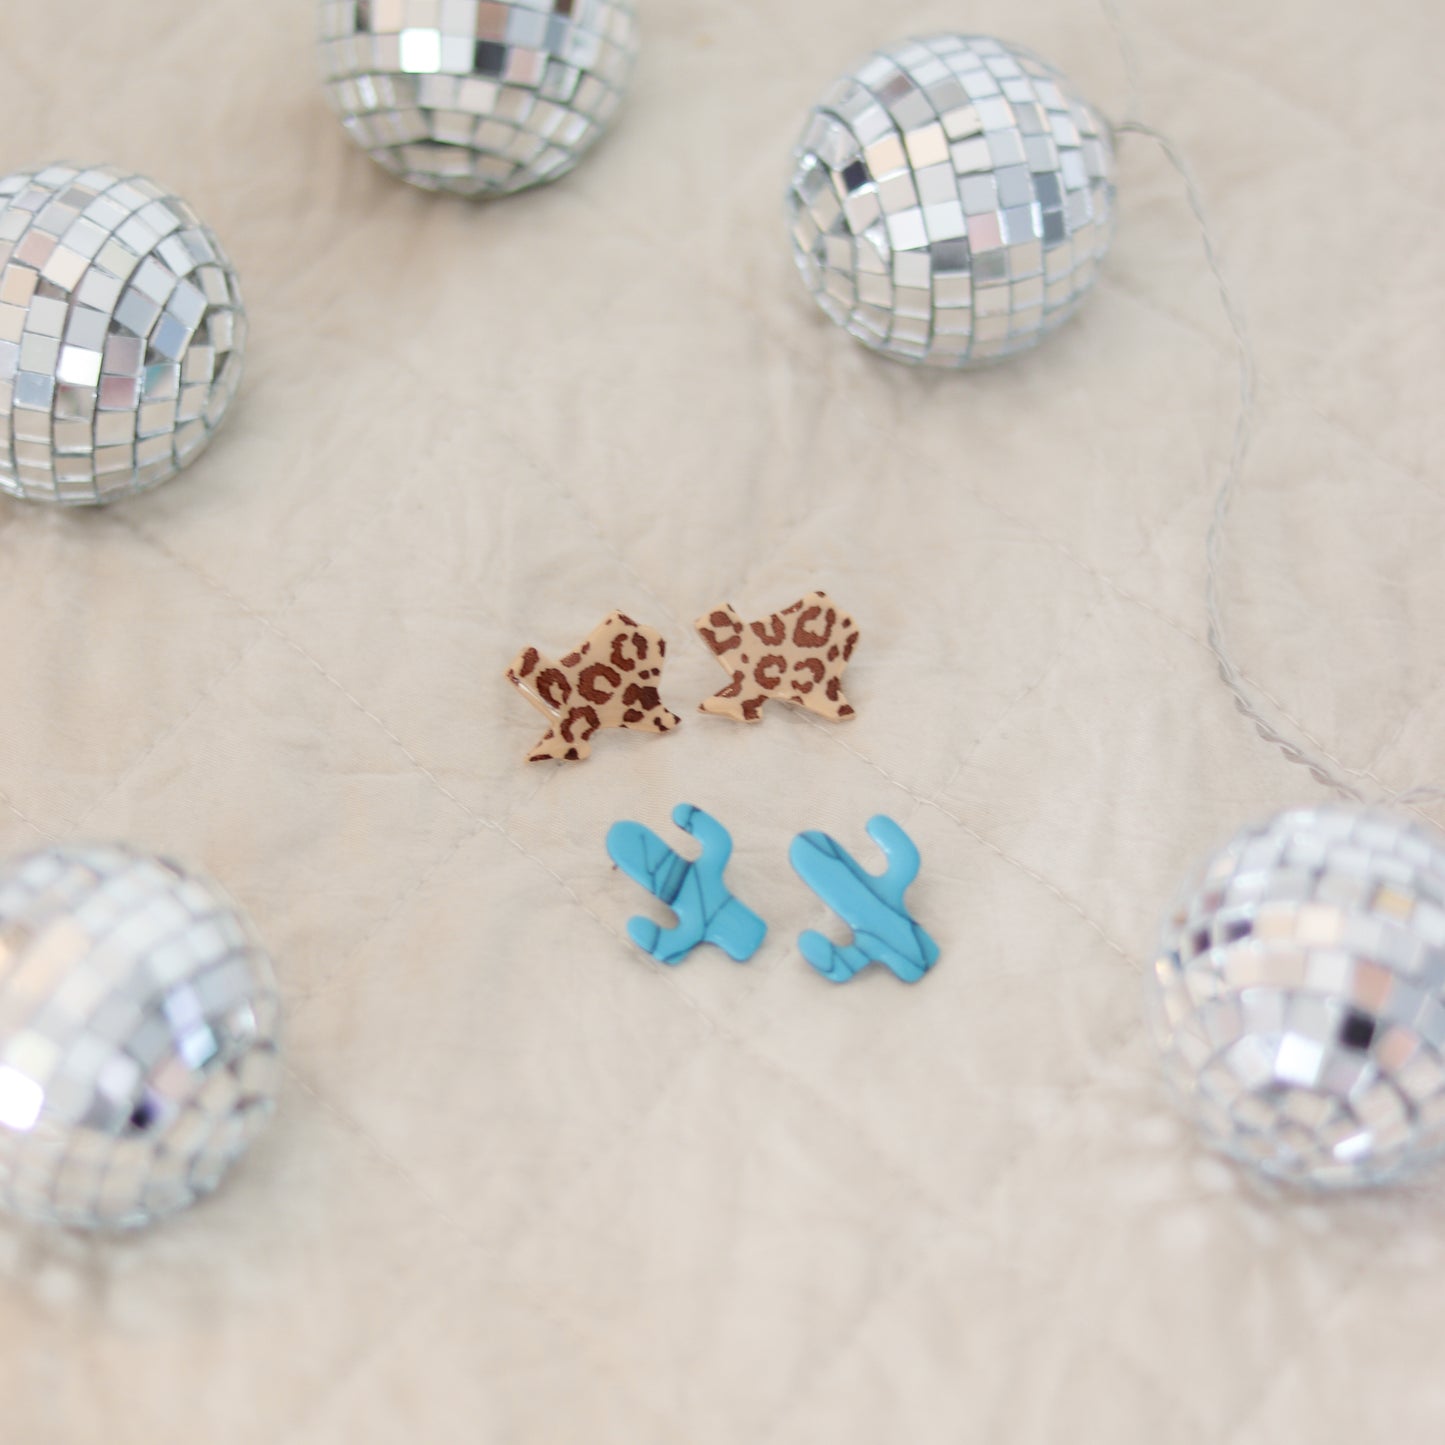 ARCHIVE Cheetah Texas and Turquoise Mini Cactus Studs ♡